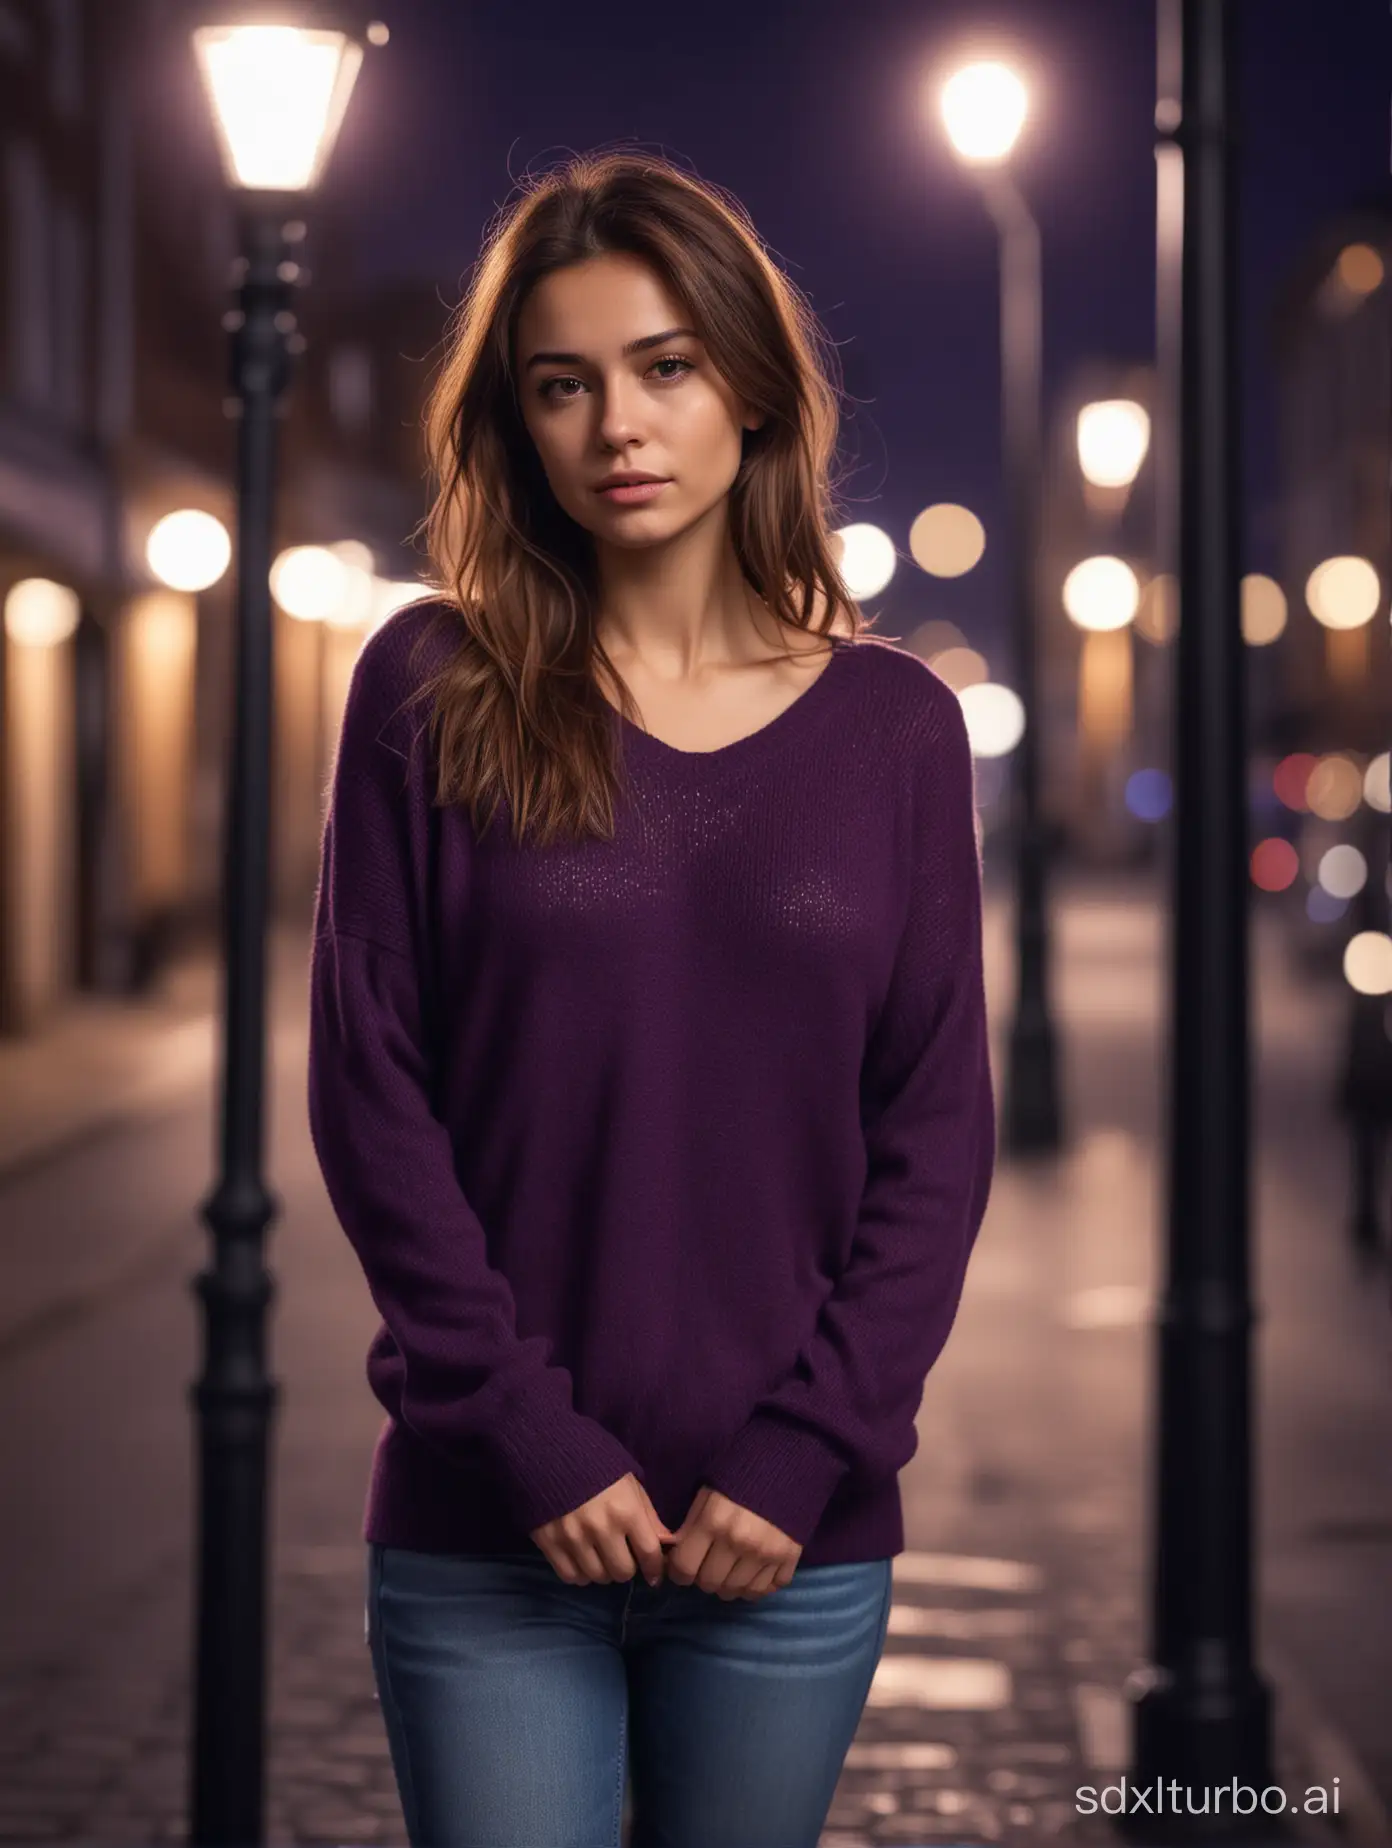 medium brown haired woman, slim body, small breast, wearing dark purple sweater, standing by a street lamp, at night, blur background, bokeh, realistic, looking sad